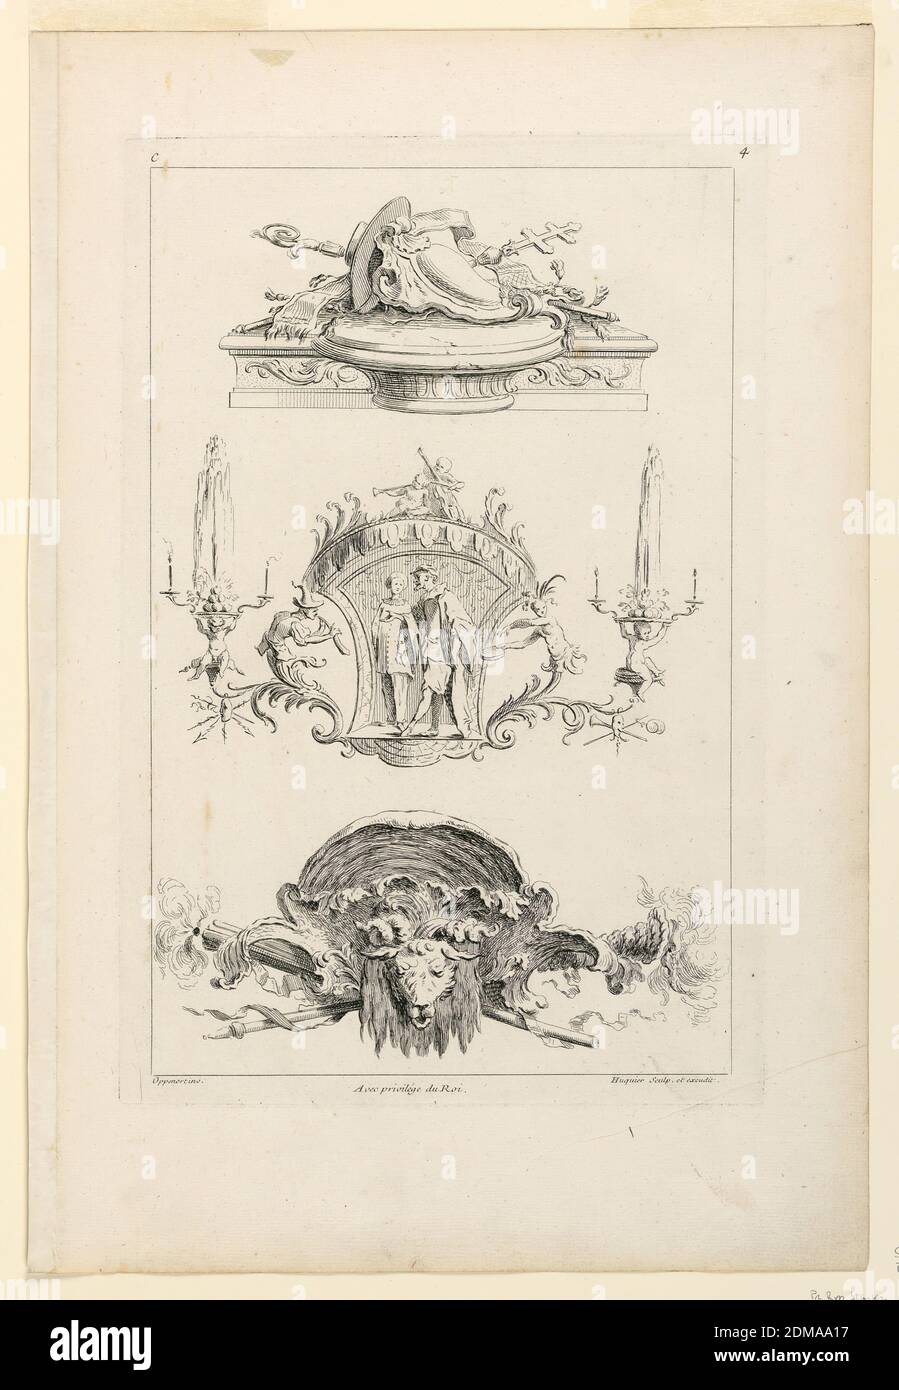 Page Four from 'Toisieme Livre Contenant Des Frises ou Paneaux en Longueur Inventés Par G. M. Oppenort Architecte du Roi et Gravés par Huquier', Gilles-Marie Oppenord, French, 1672–1742, Gabriel Huquier, French, 1695–1772, Etching on paper, Three ornamental compositions. First (upper): a console with fanciful arrangement of hats, etc. In middle: actors from an Italian comedy in an arabesque design. Third: head of a ram set against a shell. Inscribed, upper left: 'C'; upper right: '4'; lower left: 'Oppenort inv.'; center: 'Avec privilege du Roi'; lower right: 'Huquier sculp. et excudit Stock Photo